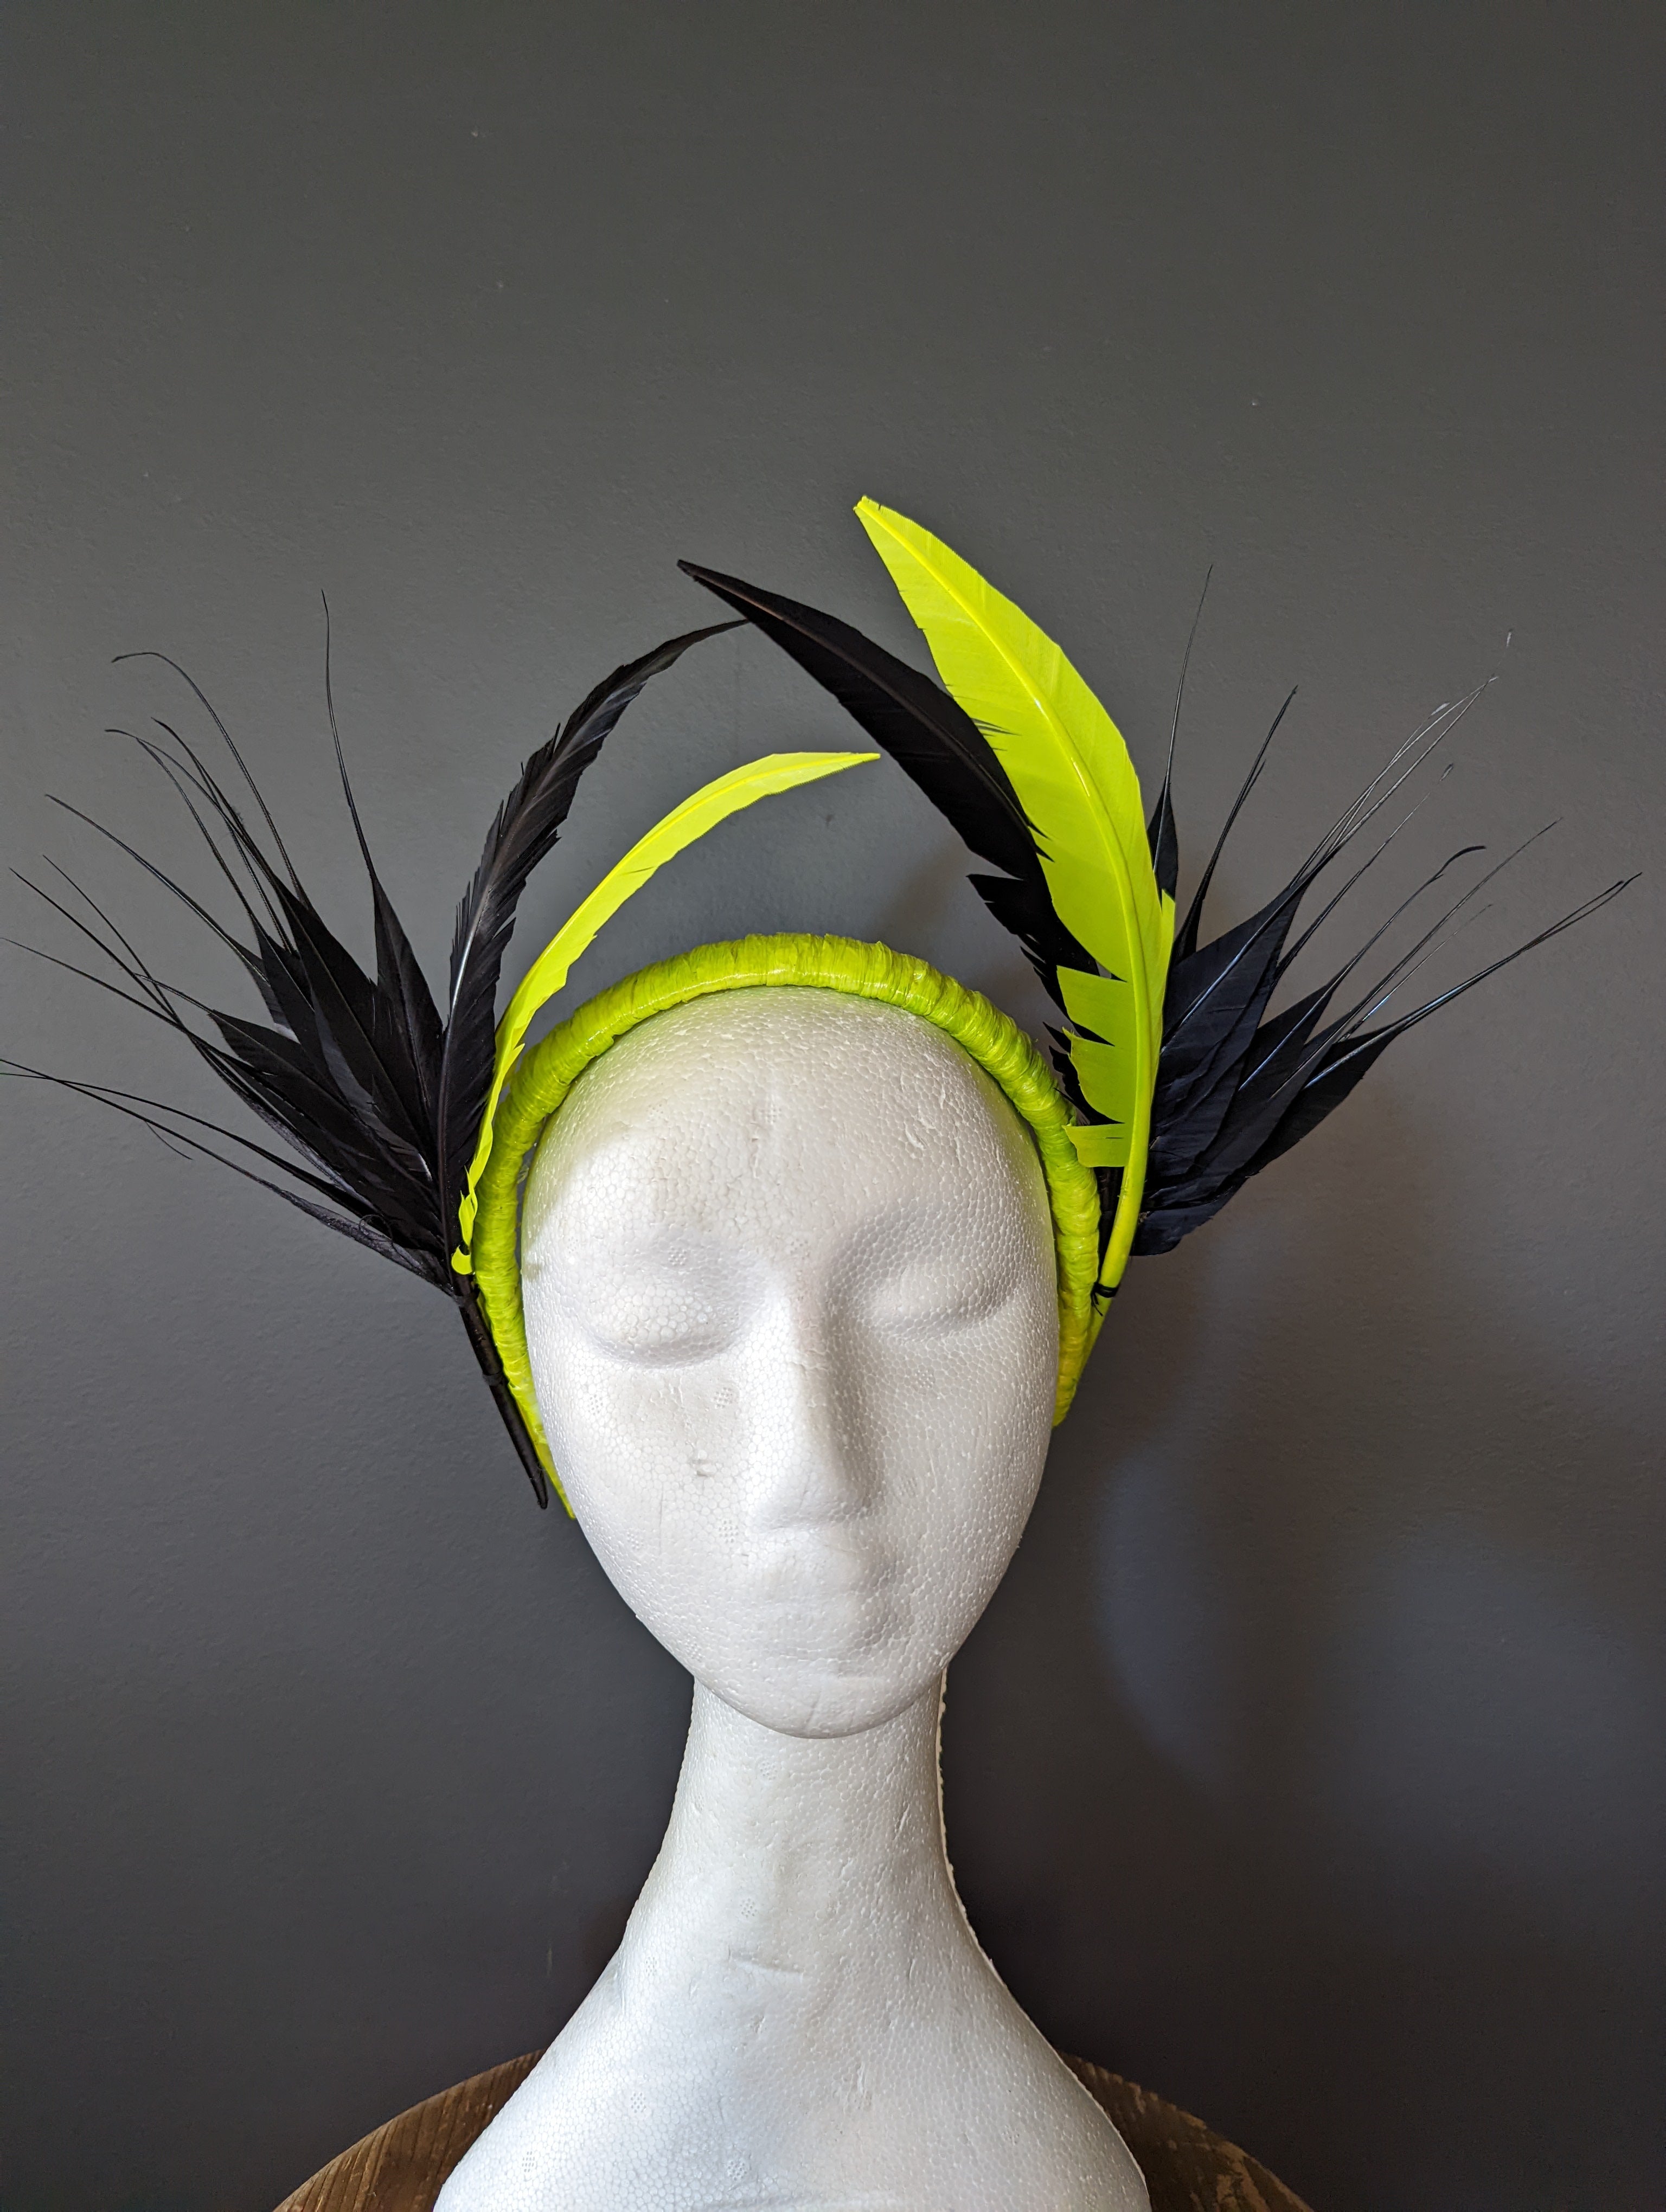 Lime and black spiked crown